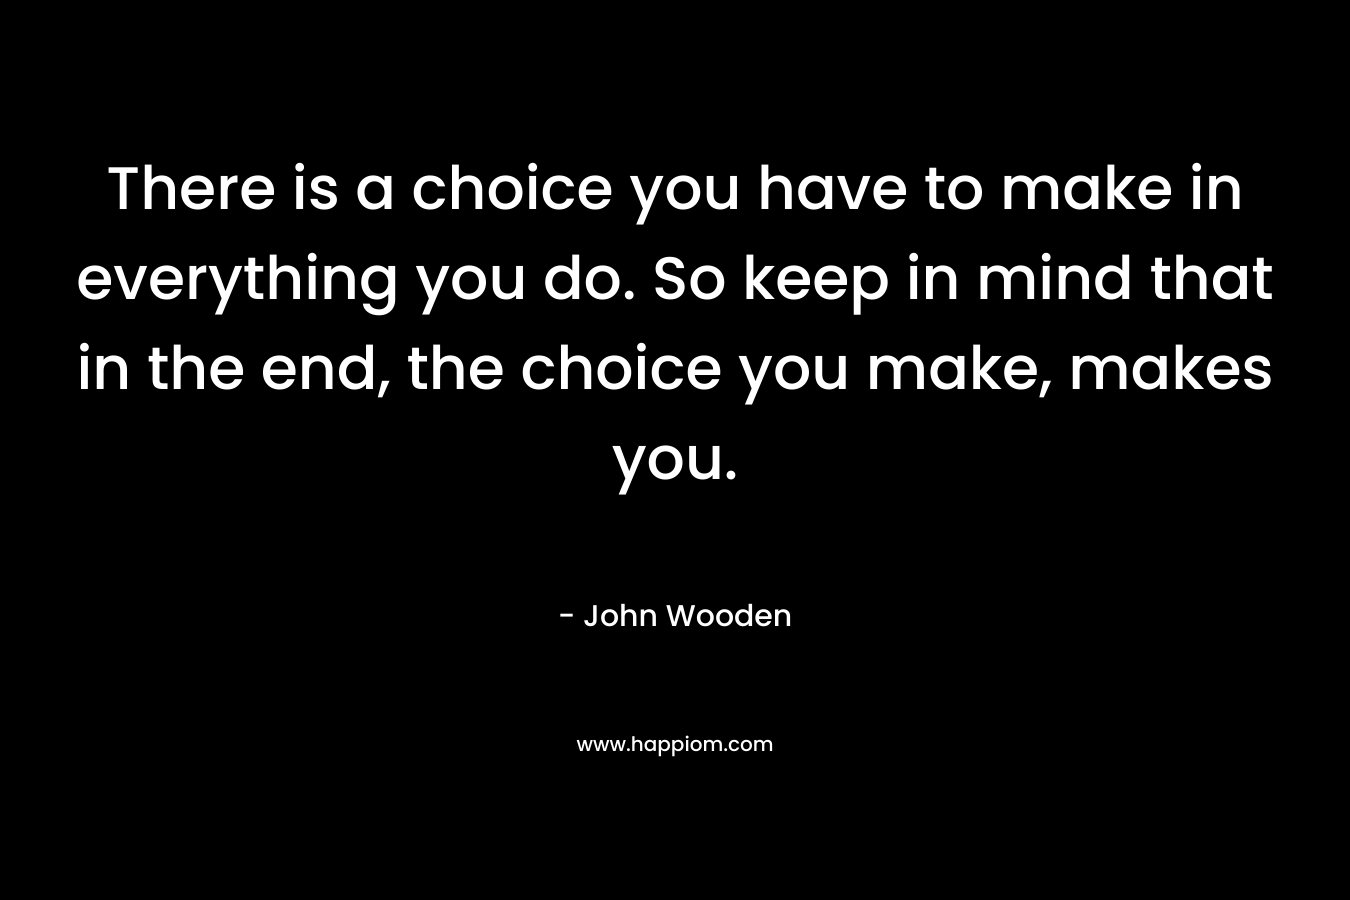 There is a choice you have to make in everything you do. So keep in mind that in the end, the choice you make, makes you. – John Wooden